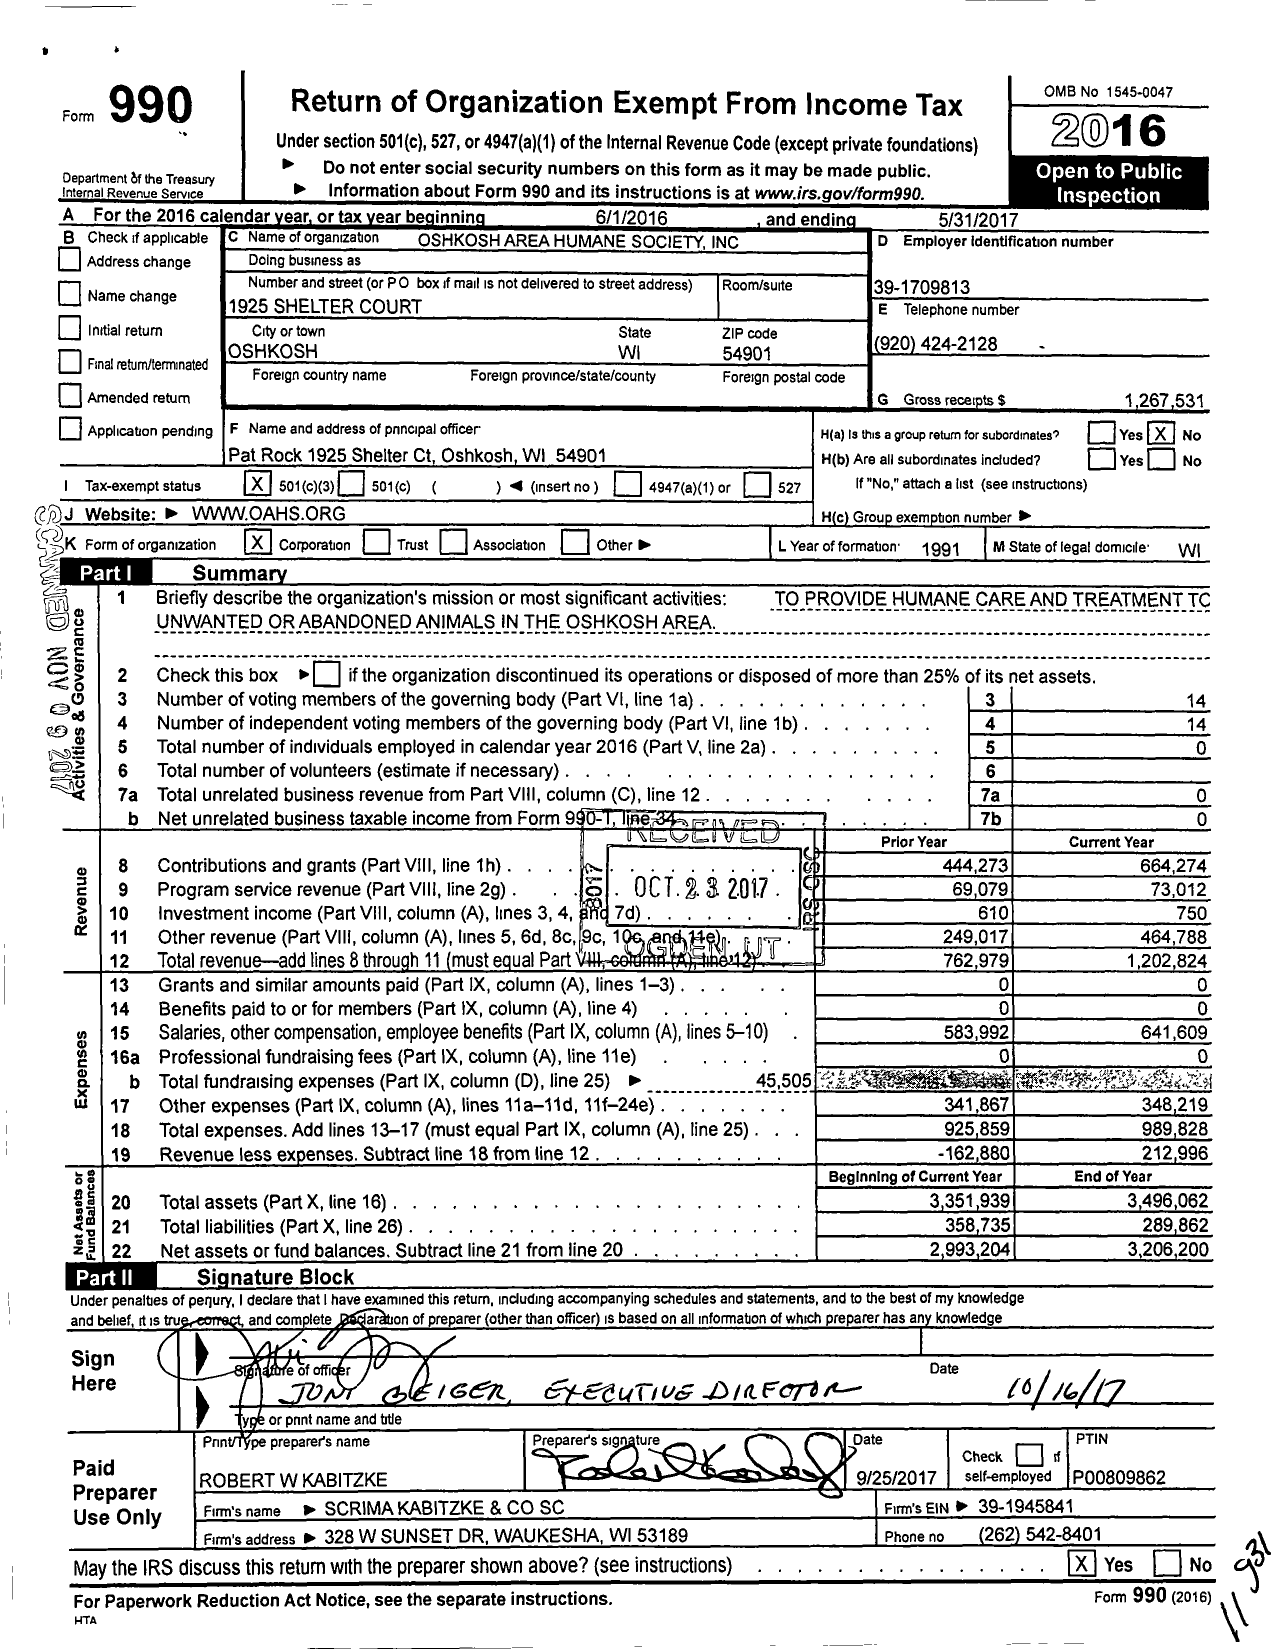 Image of first page of 2016 Form 990 for Oshkosh Area Humane Society (OAHS)